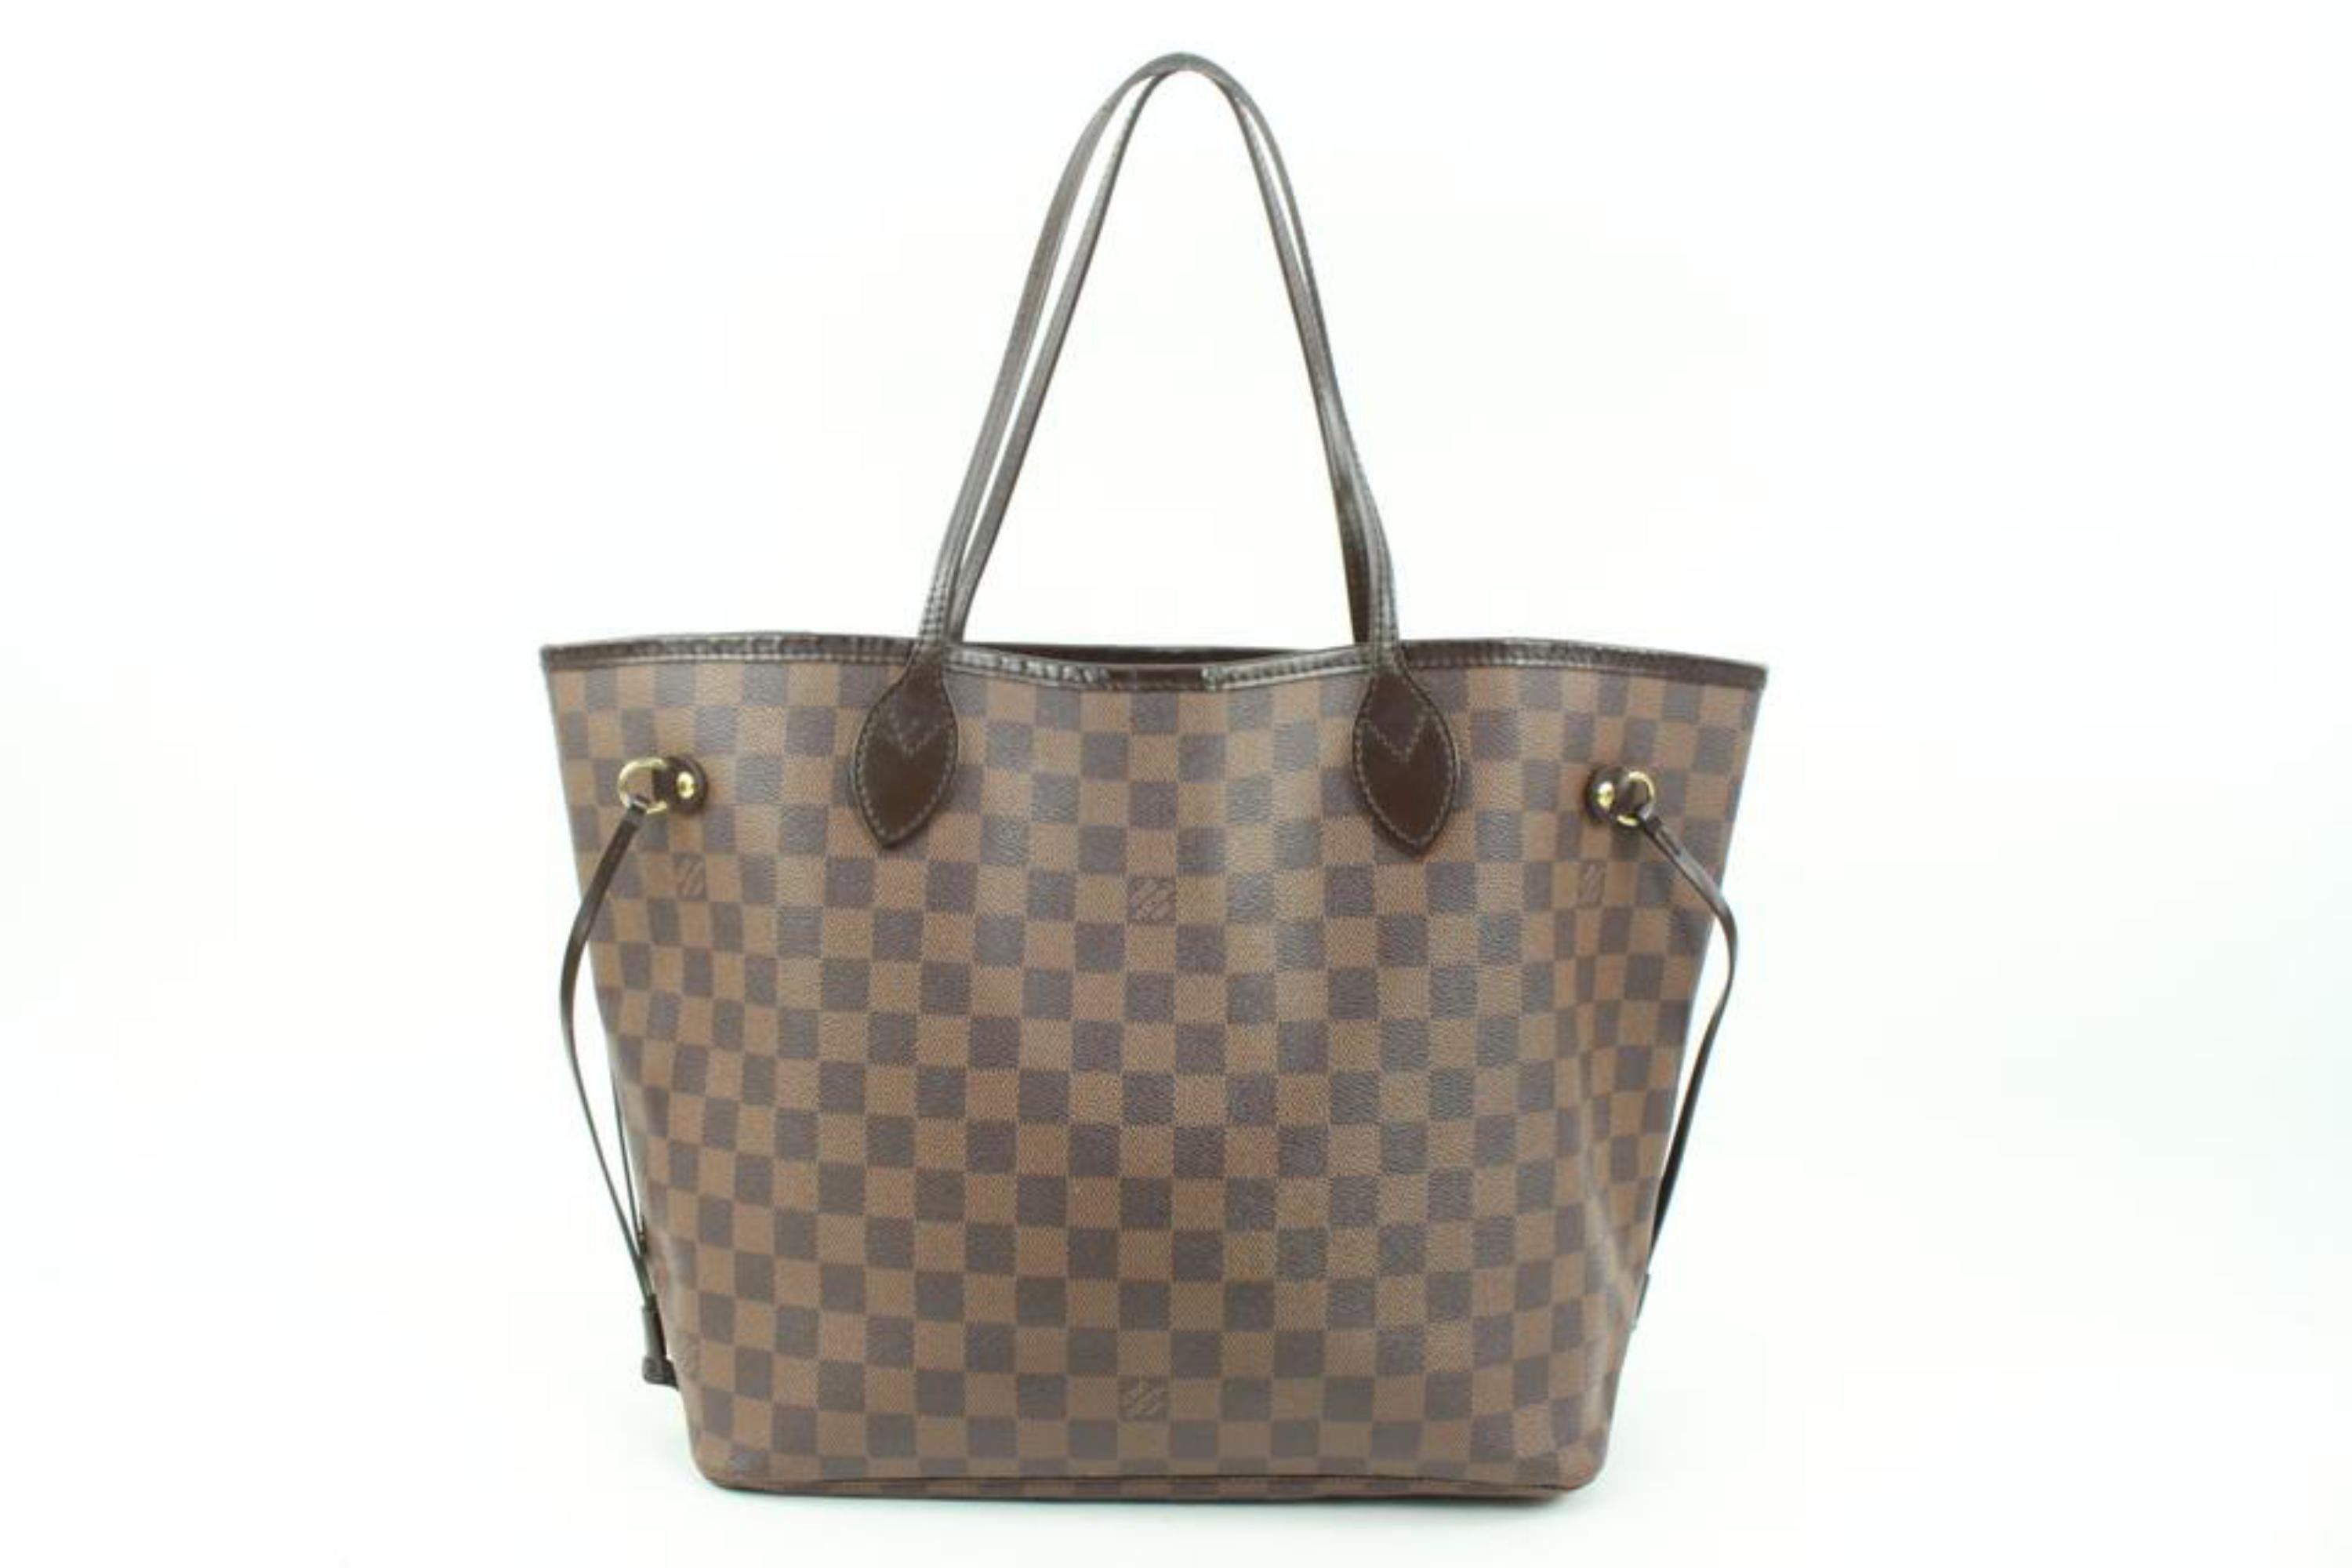 Louis Vuitton Damier Ebene Neverfull MM Tote Bag 60lv128s In Good Condition For Sale In Dix hills, NY